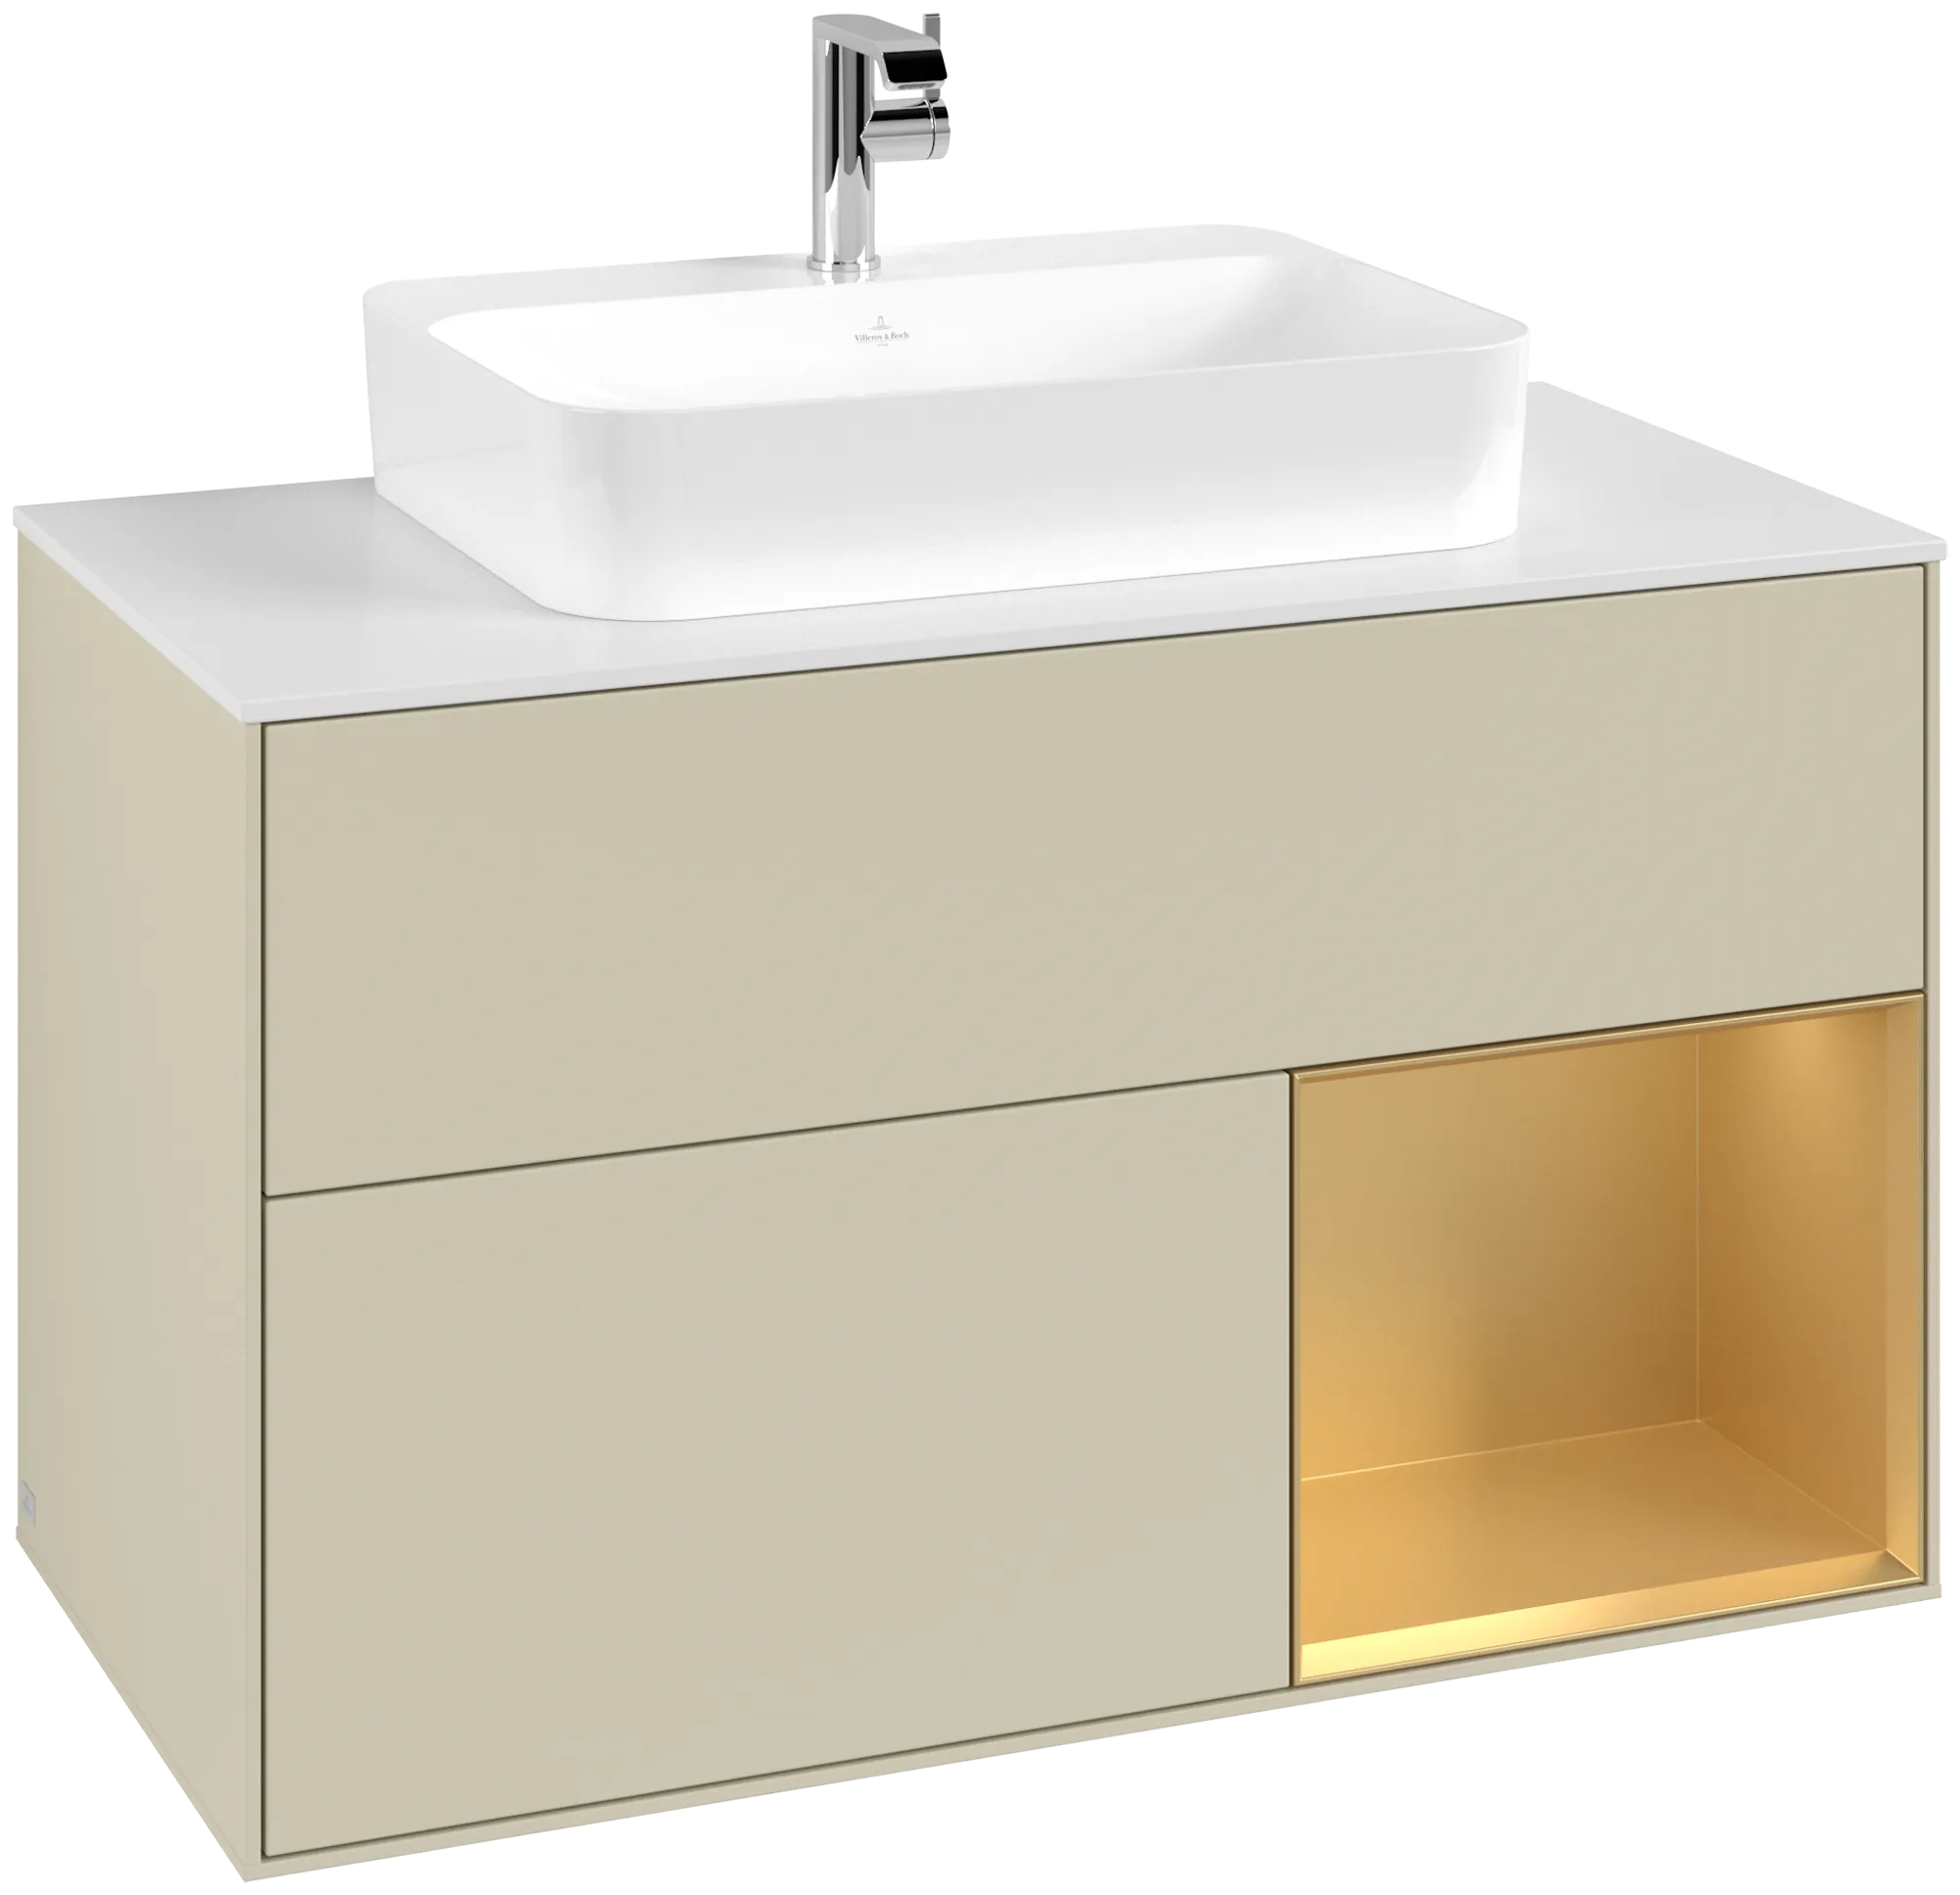 Picture of VILLEROY BOCH Finion Vanity unit, with lighting, 2 pull-out compartments, 1000 x 603 x 501 mm, Silk Grey Matt Lacquer / Gold Matt Lacquer / Glass White Matt #G371HFHJ